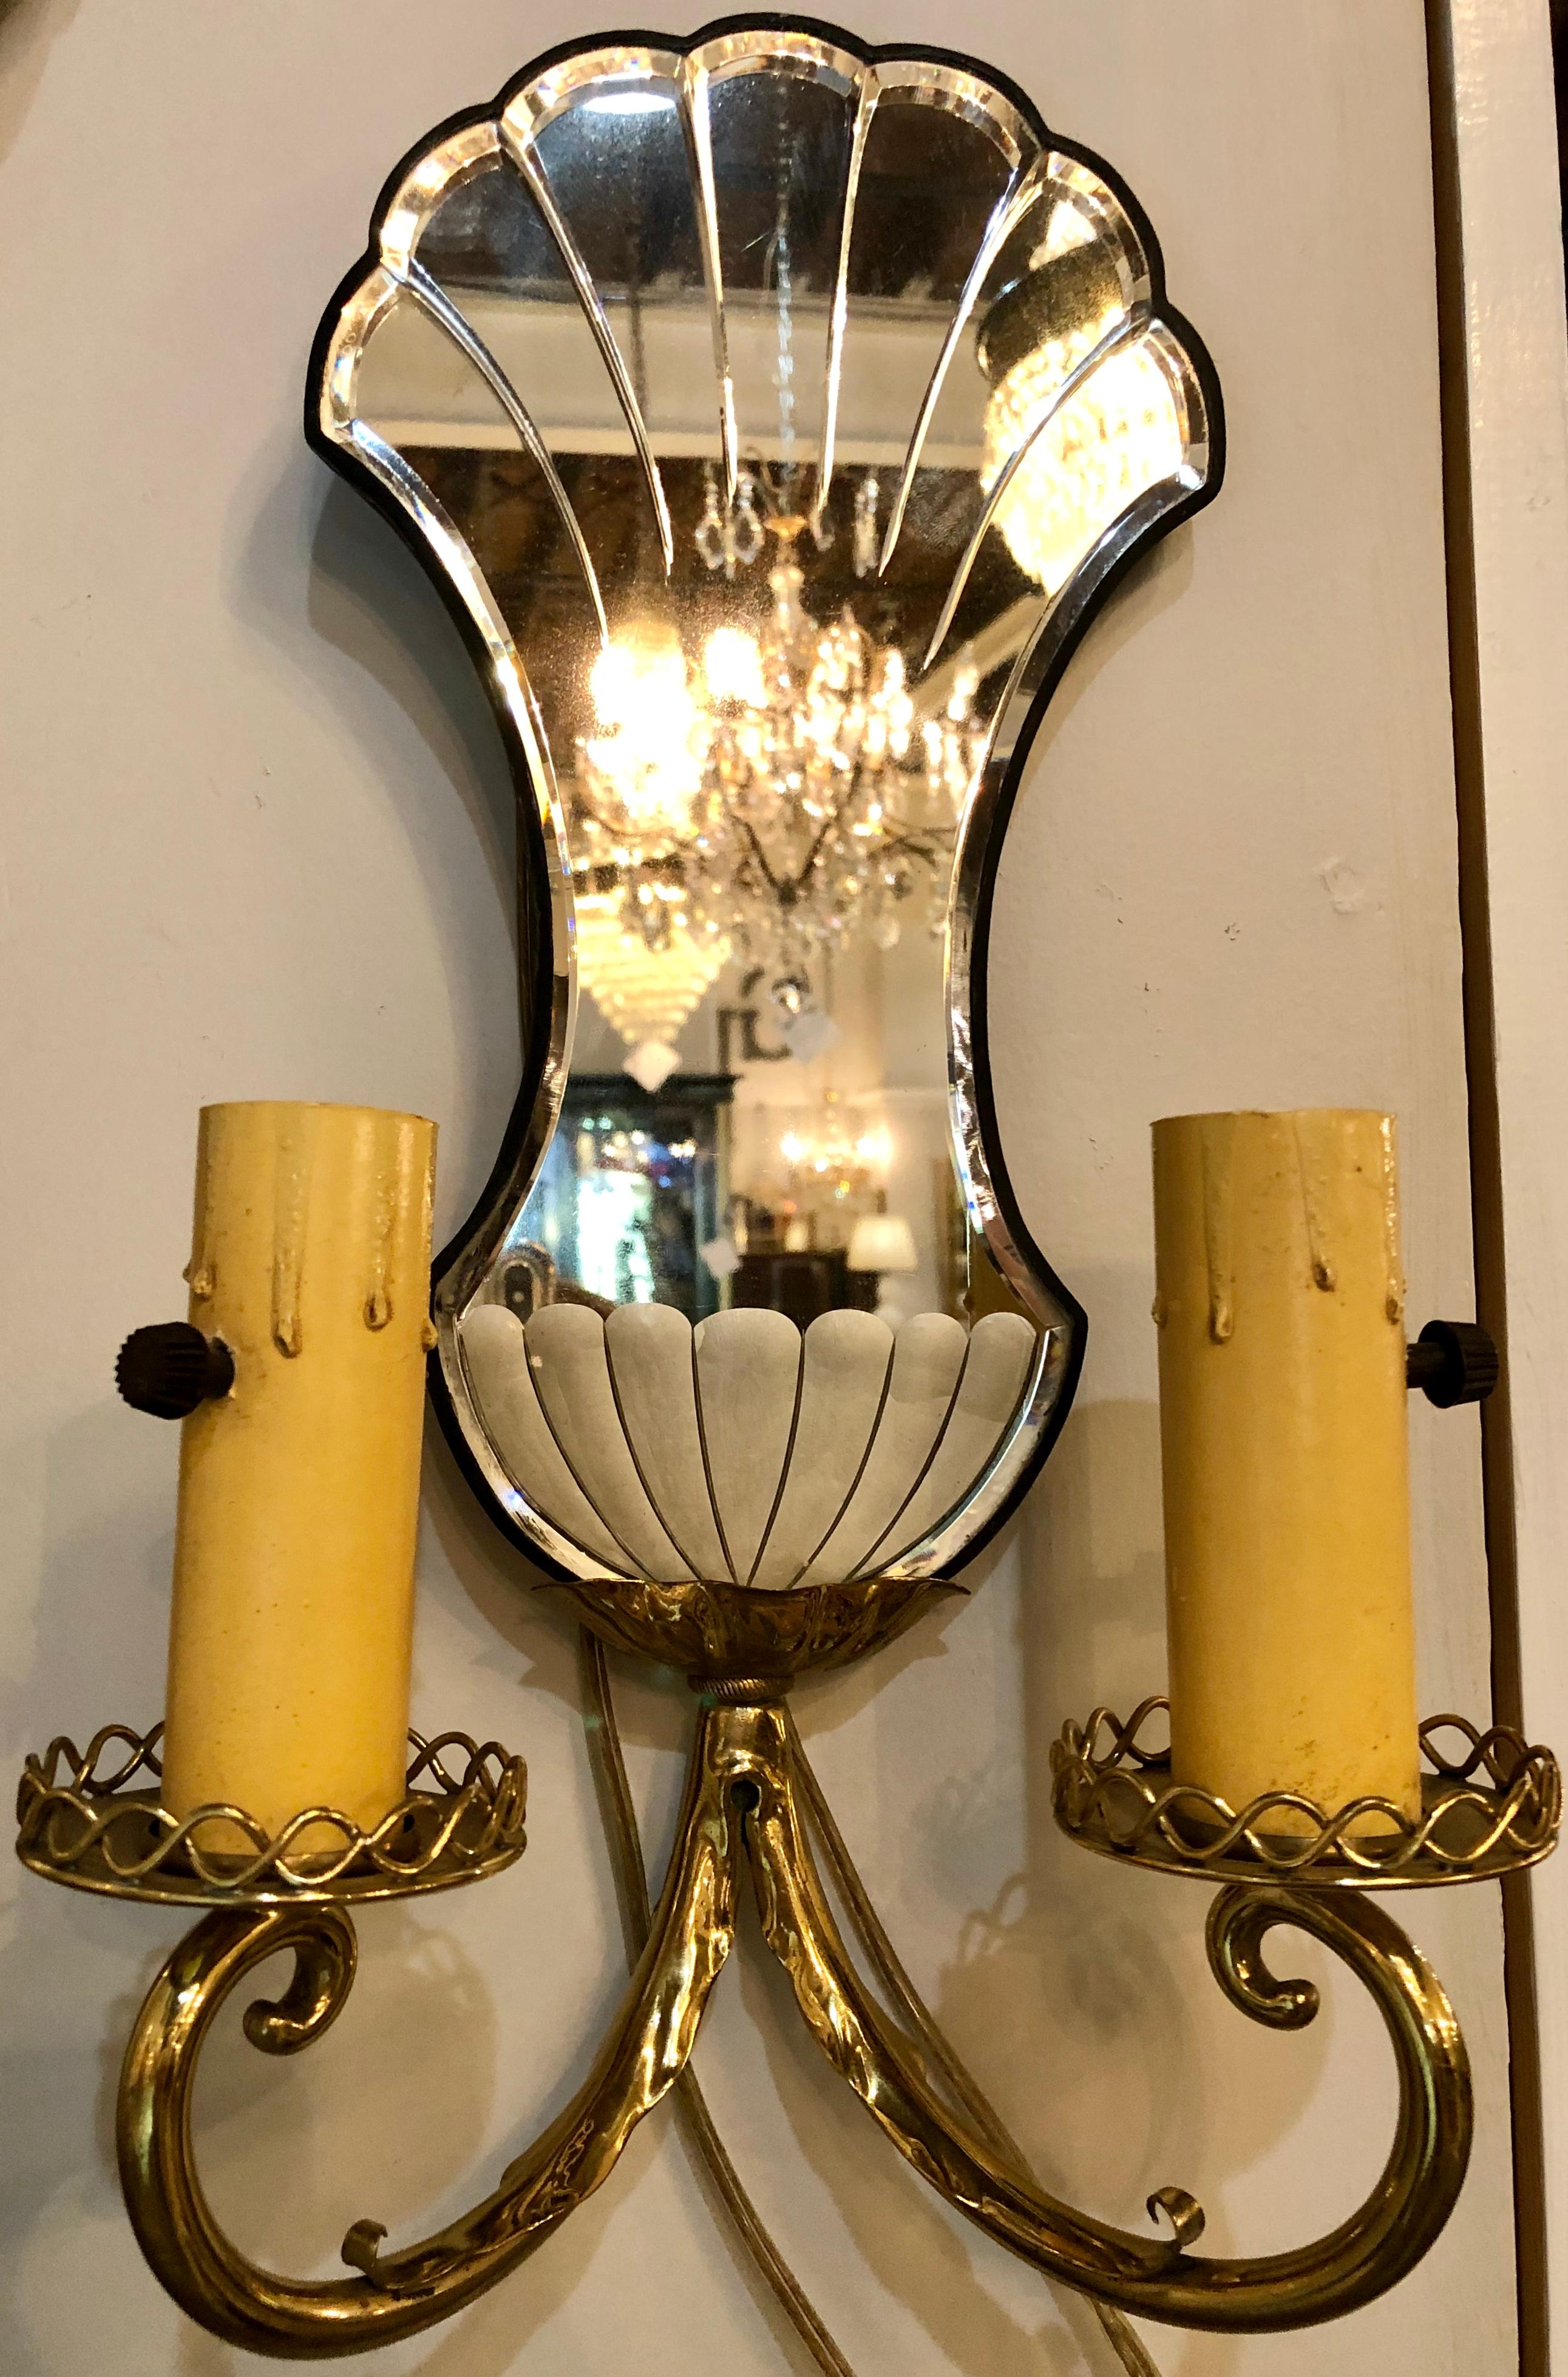 Pair of Jansen wall sconces. Hollywood Regency era with mirror backs each having two arms and etched mirror back plates.